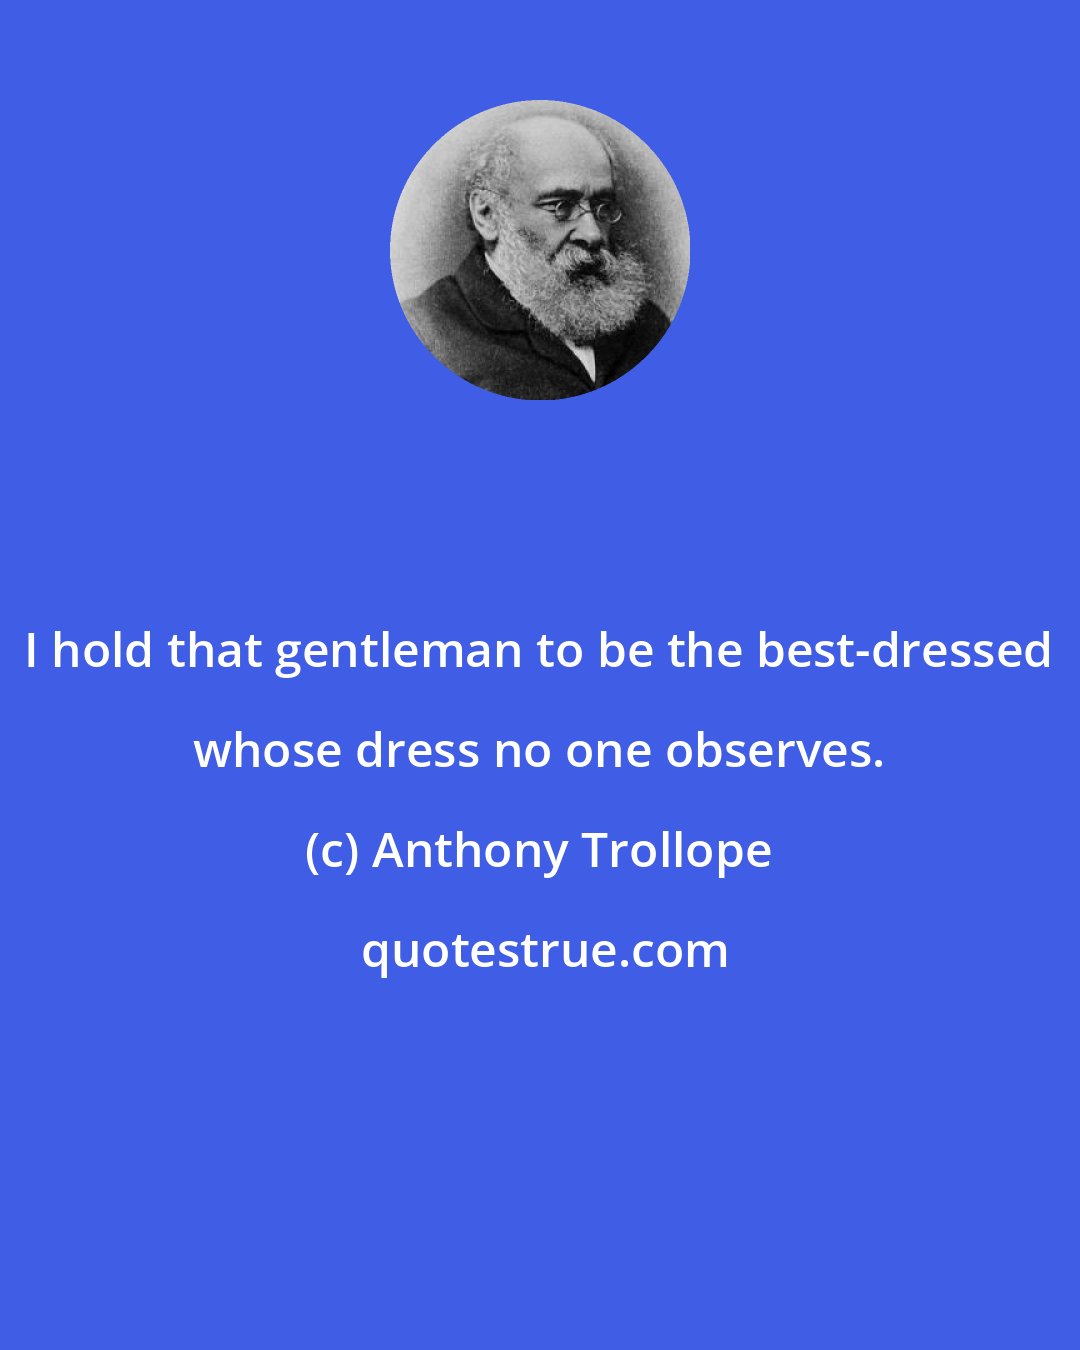 Anthony Trollope: I hold that gentleman to be the best-dressed whose dress no one observes.